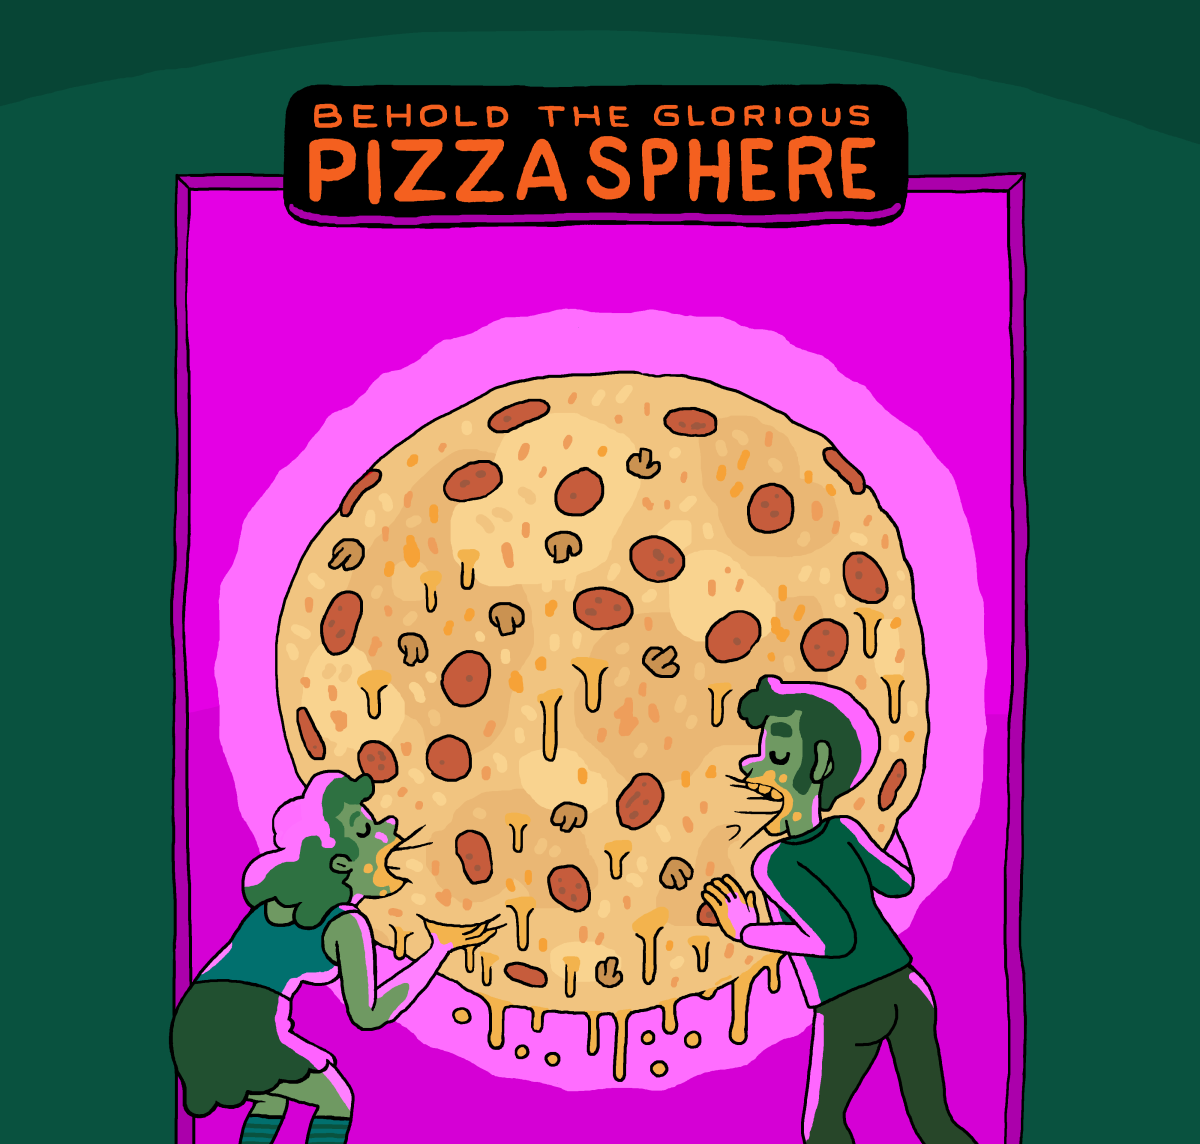 This is a cartoon version of pizza.